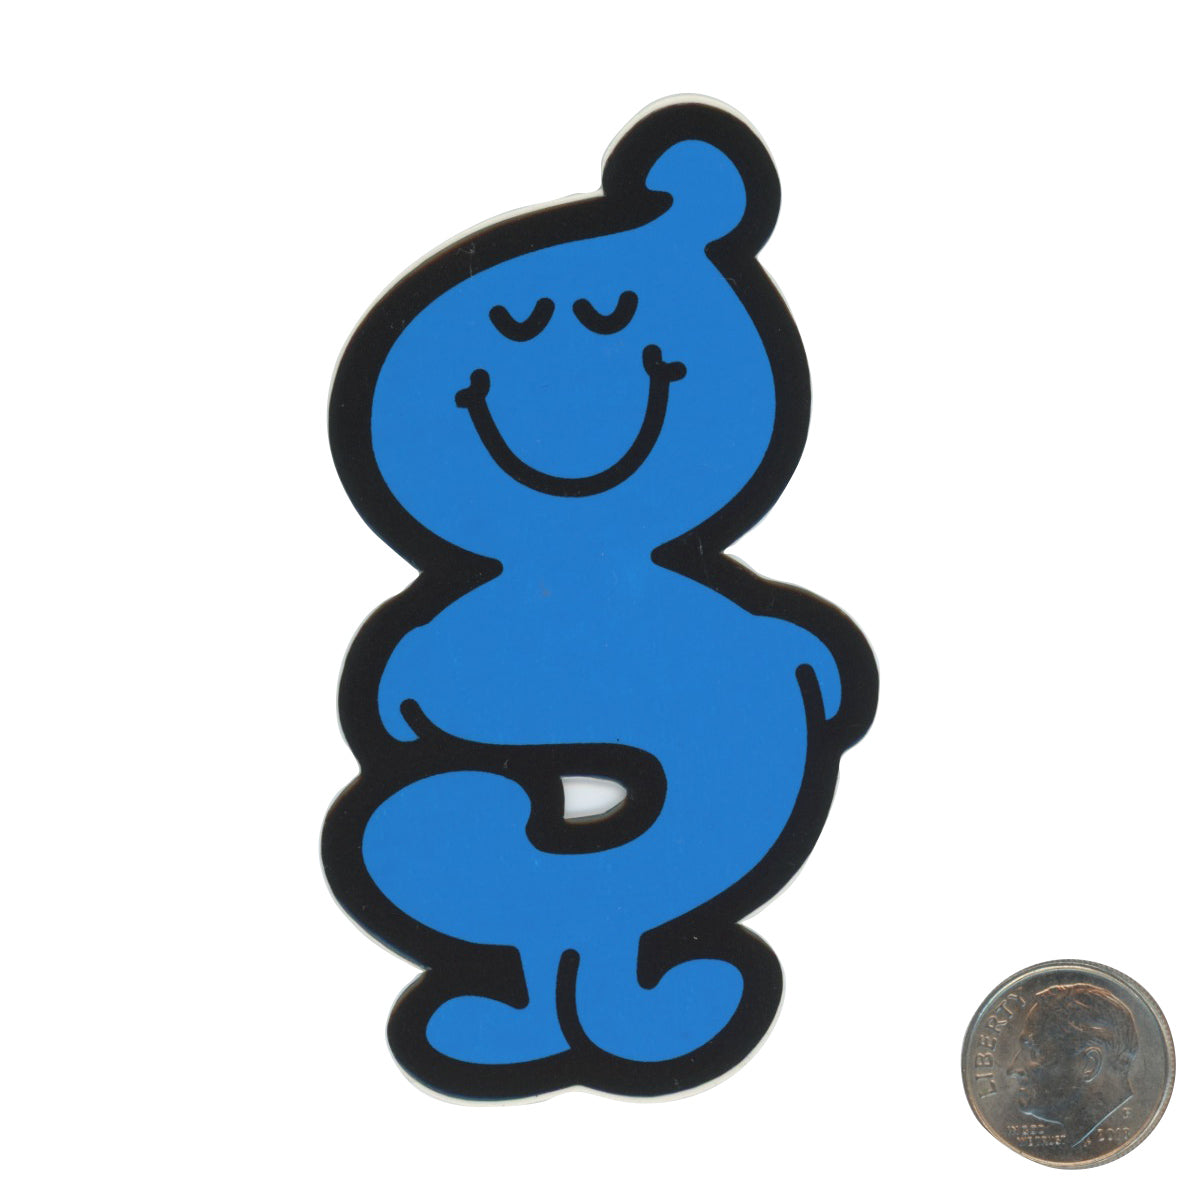 GOODENOUGH "G" Large Blue Sticker with dime